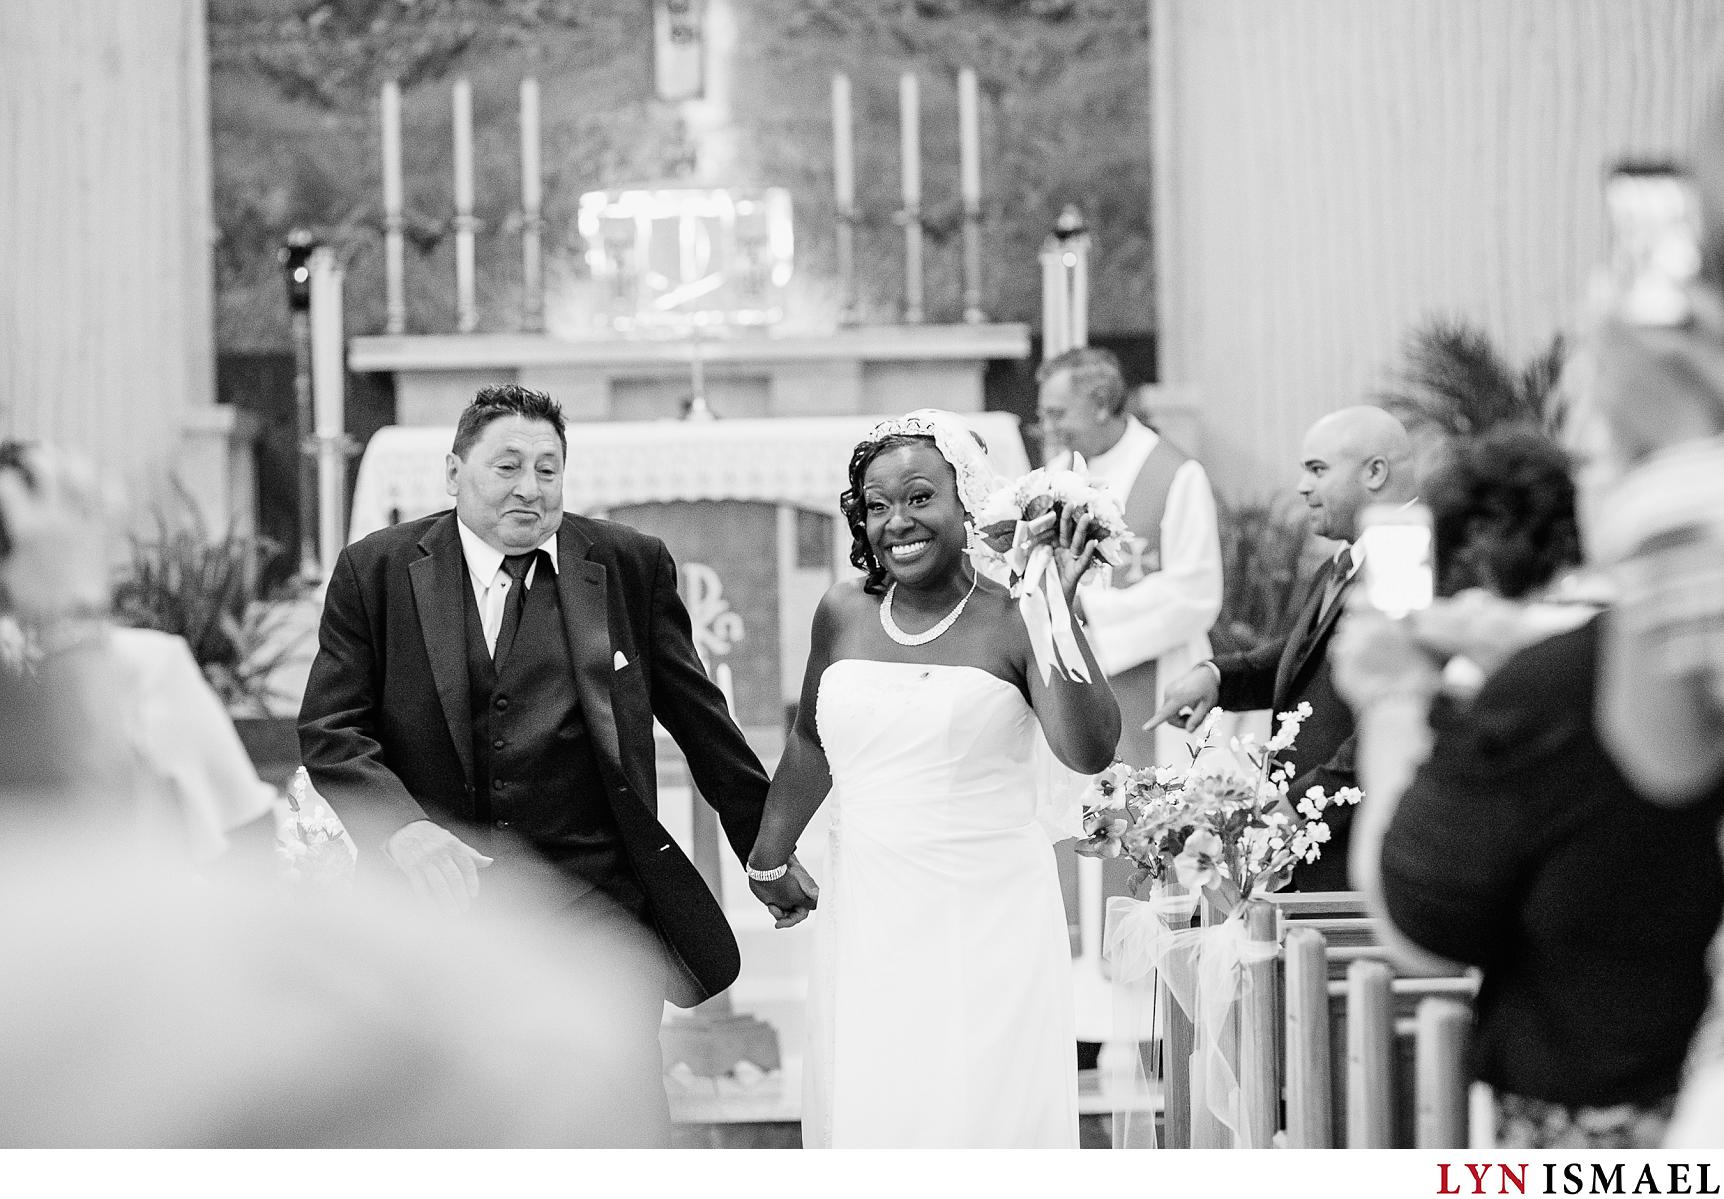 Bride and groom dances at their recessional after their wedding ceremony